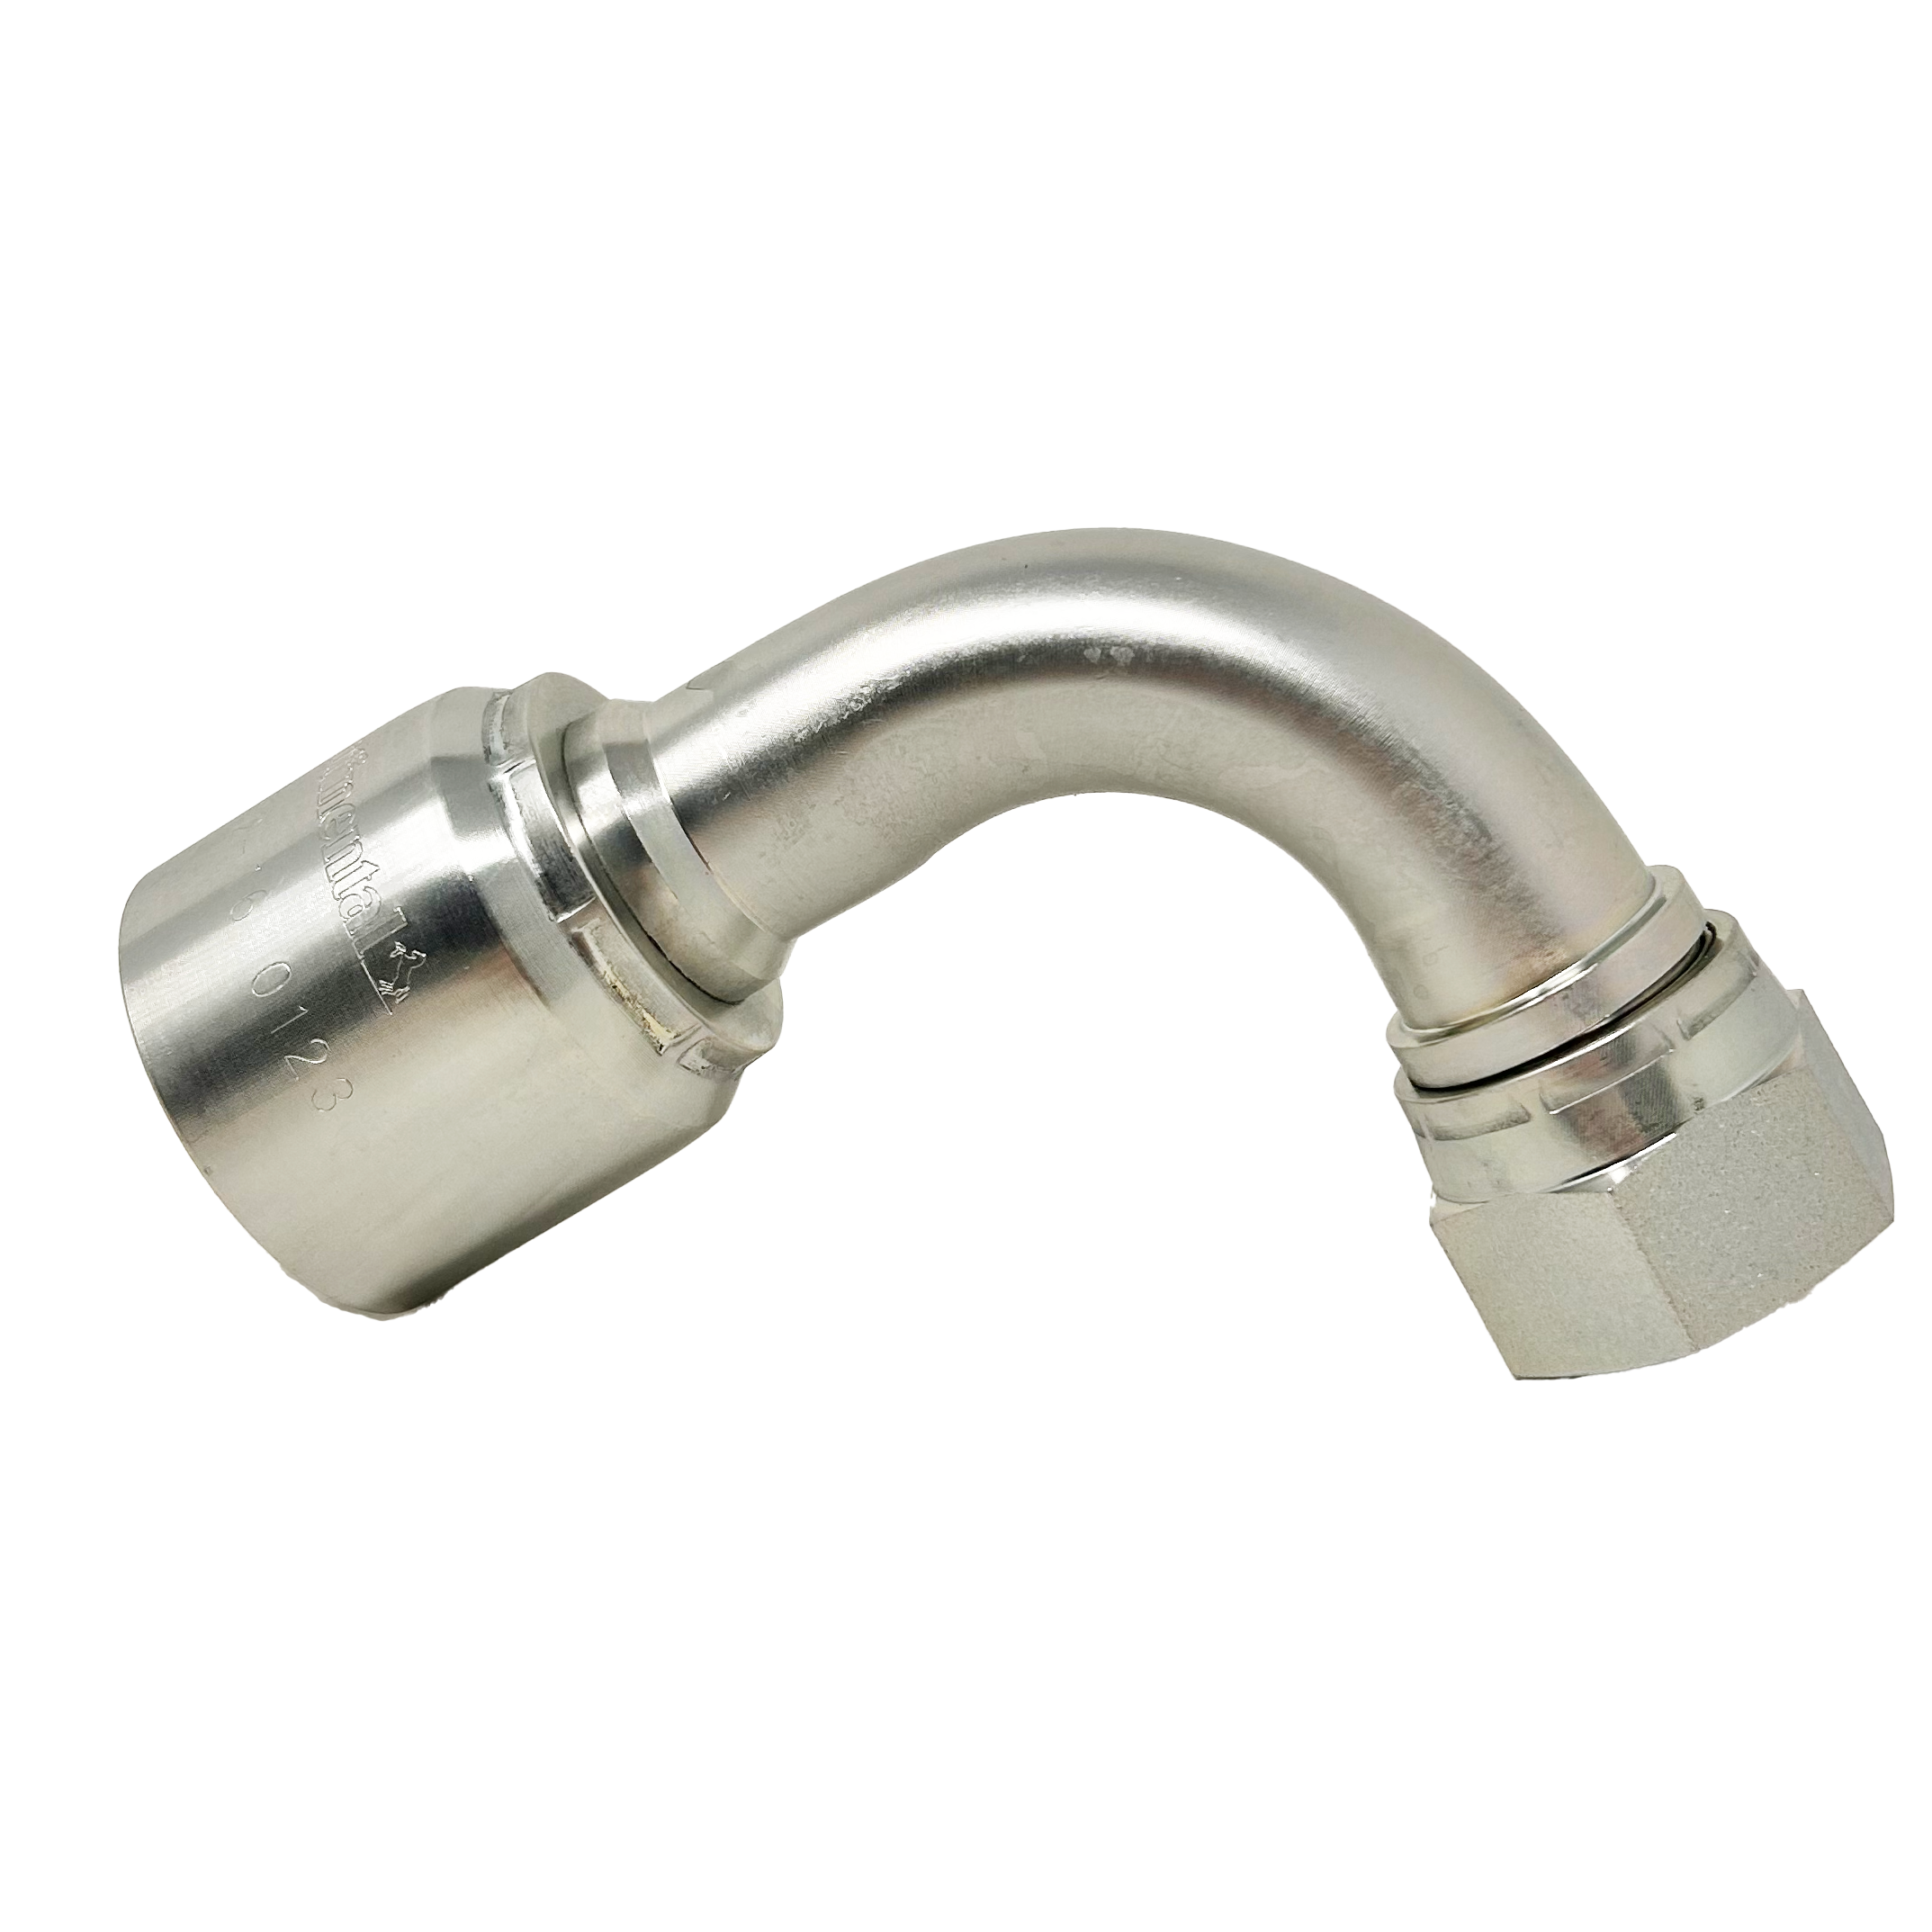 B2-JCFX90-1210: Continental Hose Fitting, 0.75 (3/4") Hose ID x 7/8-14 Female JIC, 90-Degree Swivel Connection